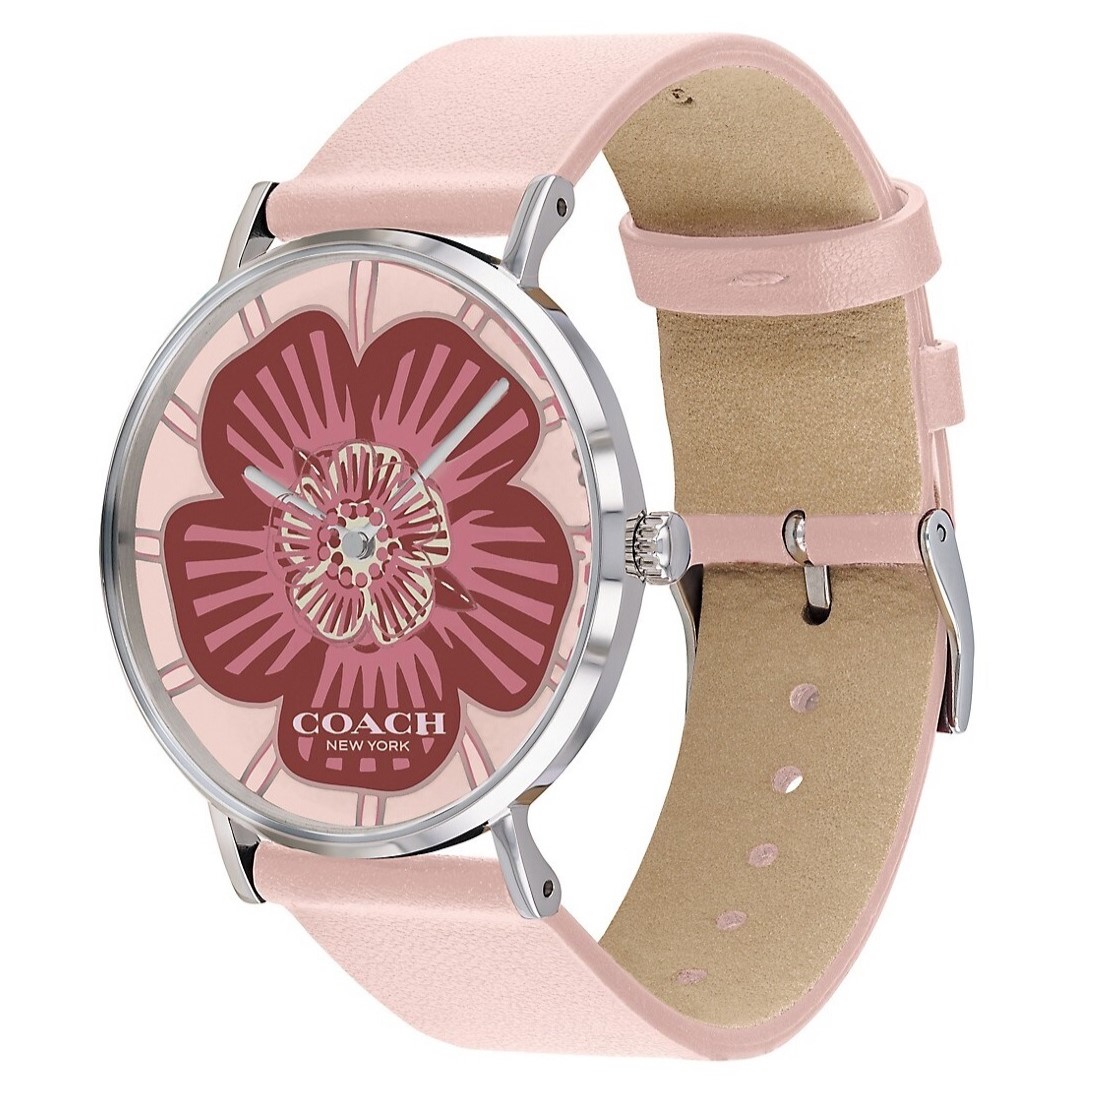 ĐỒNG HỒ ĐEO TAY COACH PERRY QUARTZ PINK FLORAL DIAL LADIES WATCH 14503231 9